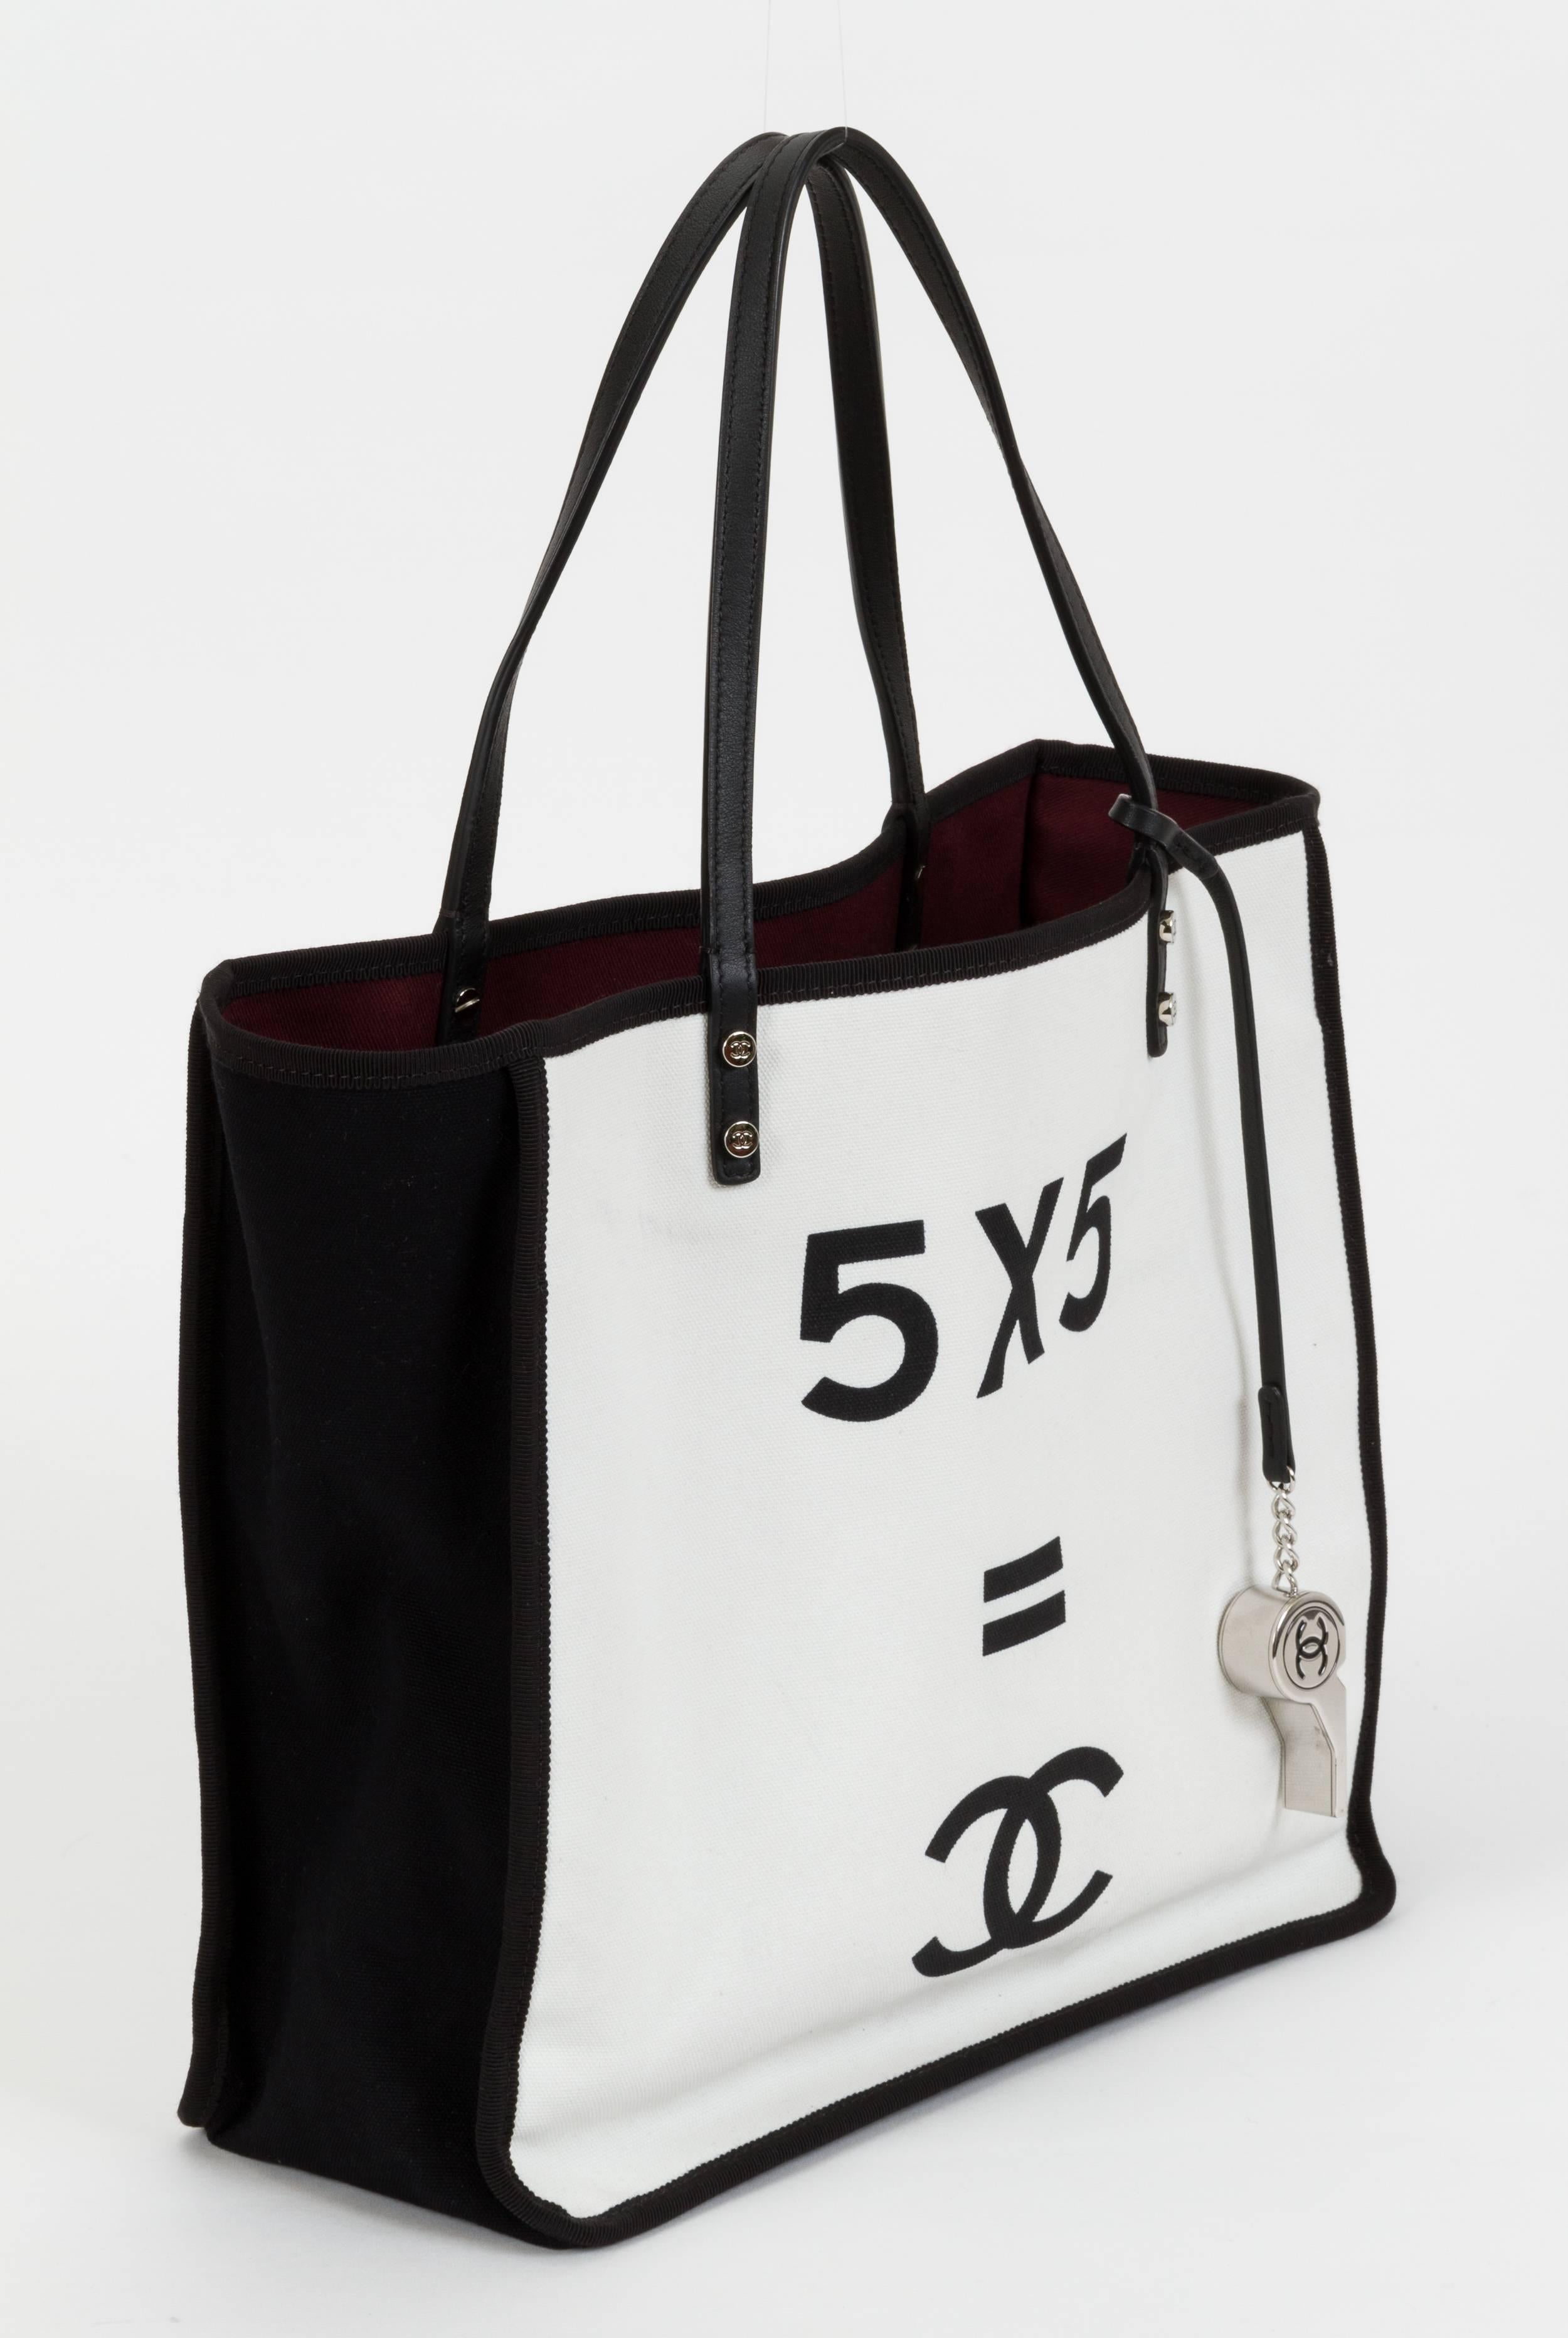 Chanel black-and-white canvas canvas tote with whistle charm. Comes with hologram, booklet, ID card, and original box. Handle drop, 7